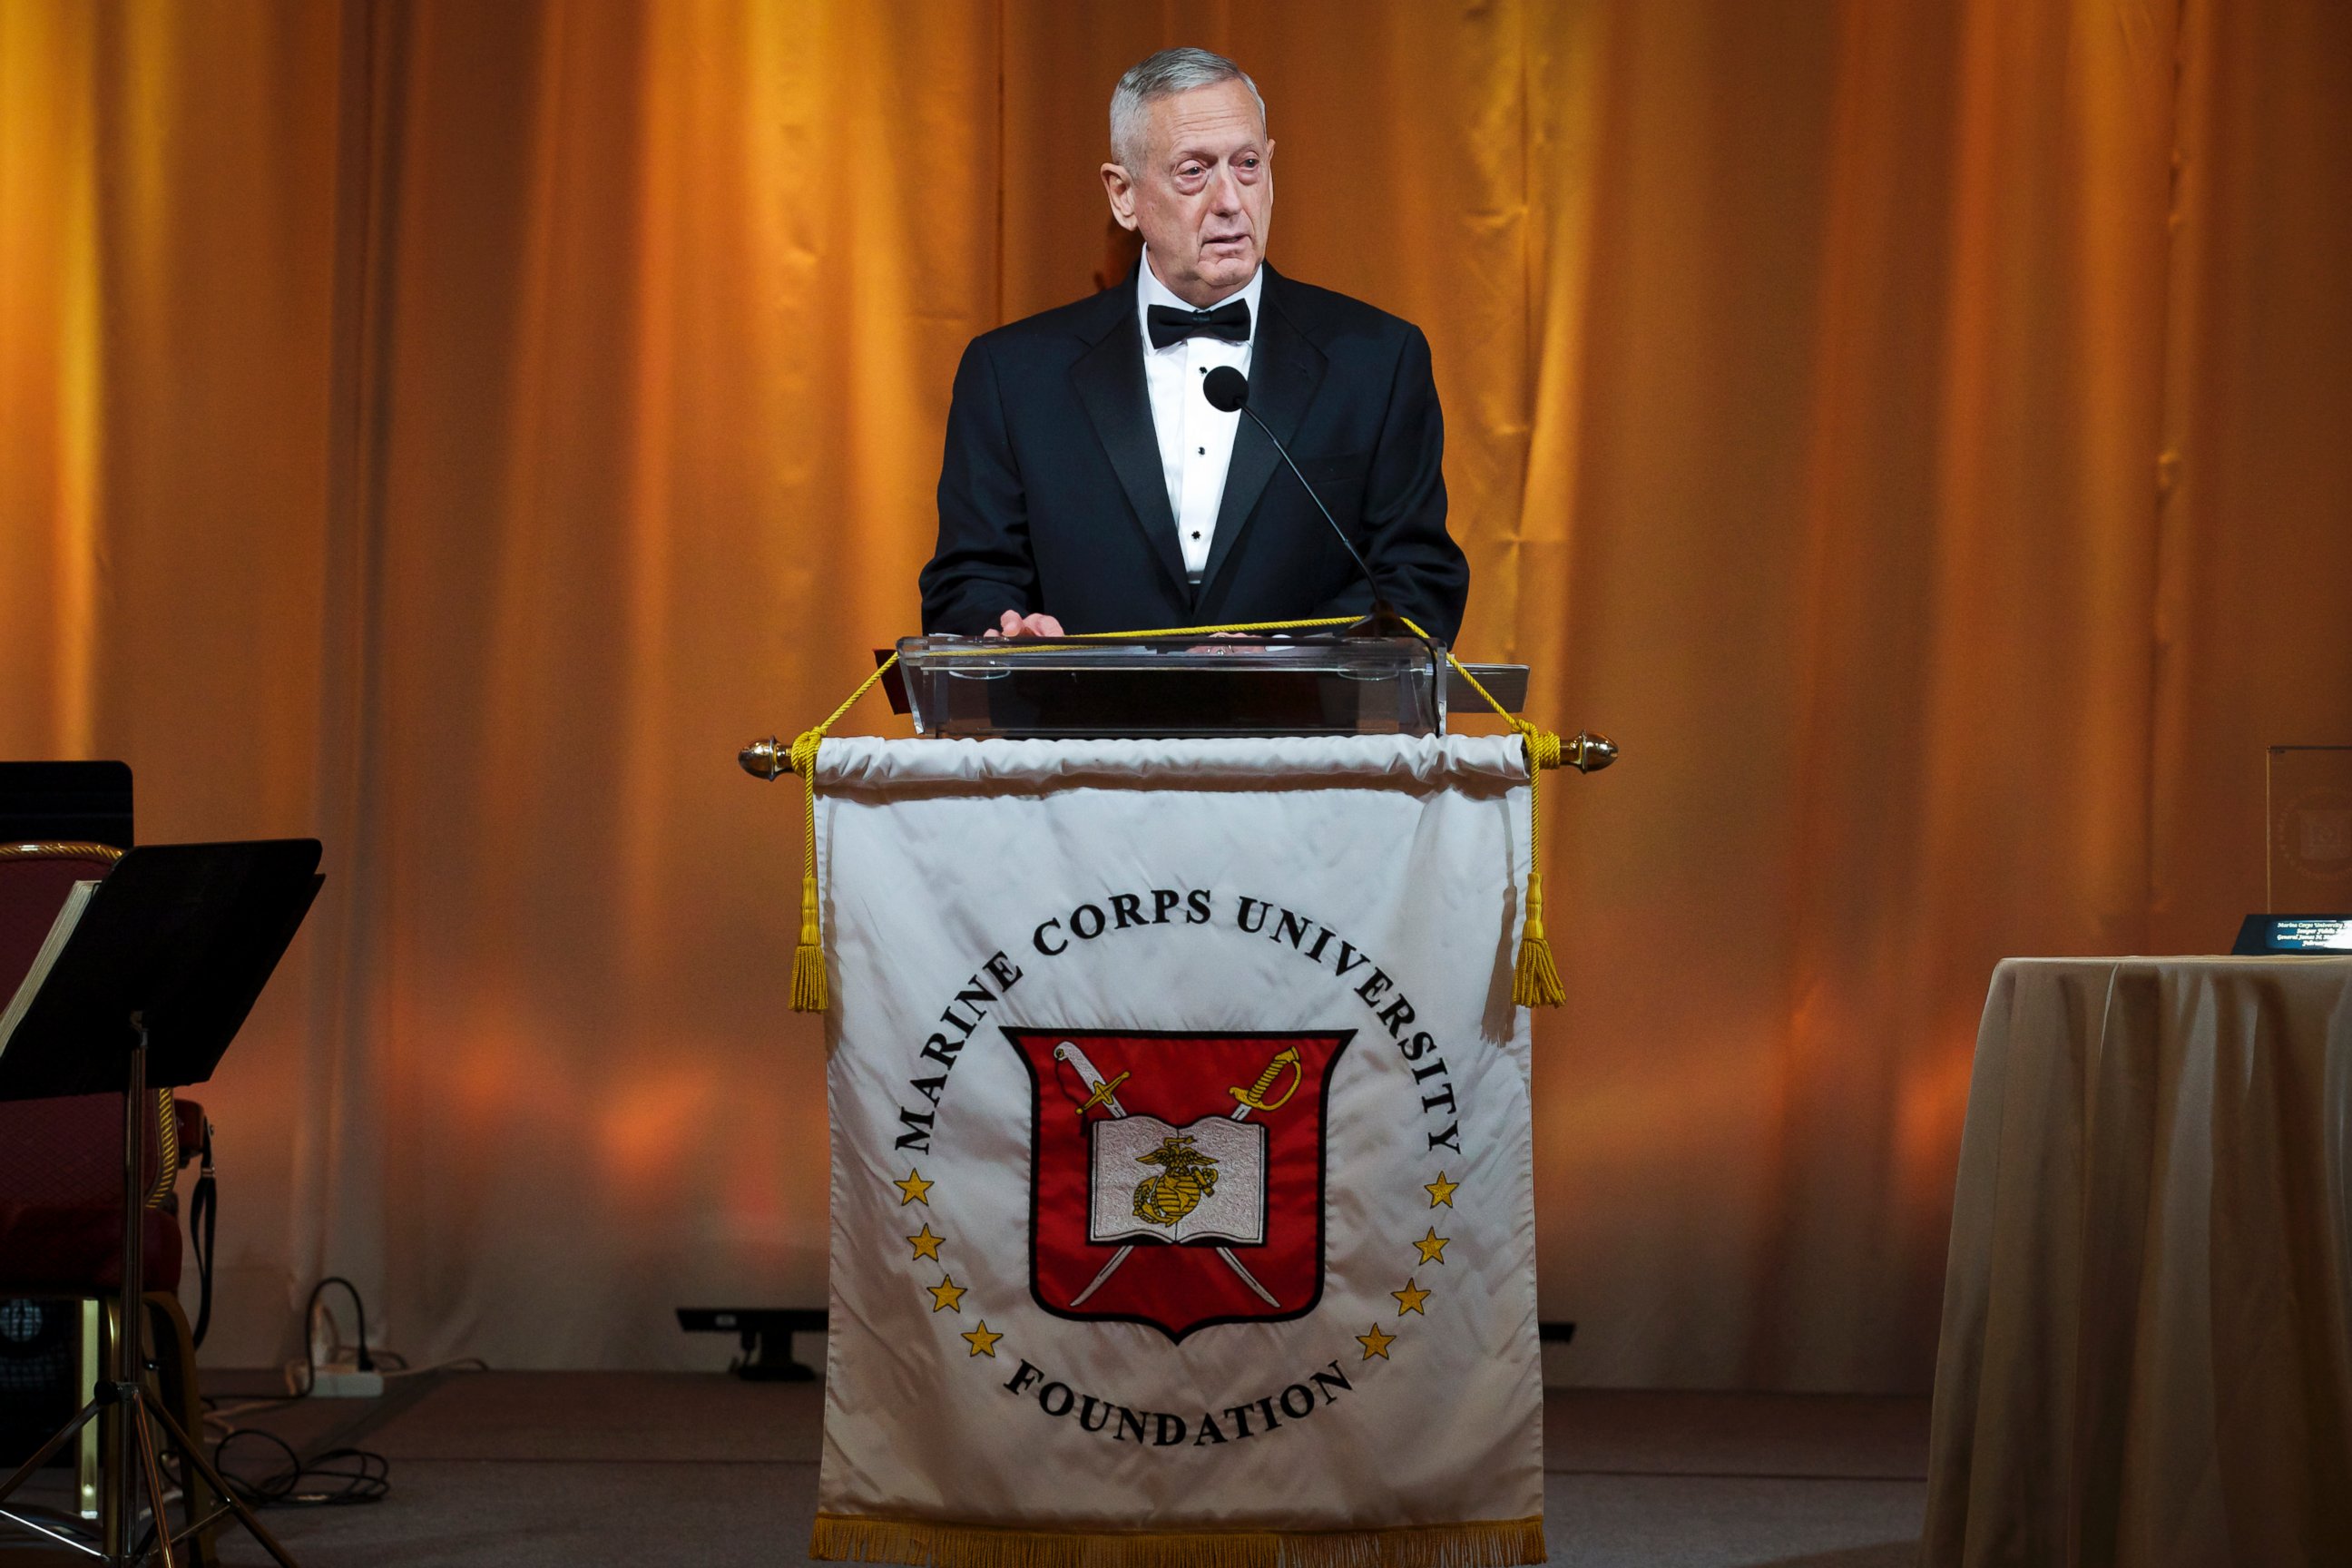 PHOTO: Retired U.S. Marine Gen. James N. Mattis delivers his remarks during the Semper Fidelis Award Ceremony and Dinner sponsored by the Marine Corps University Foundation in Arlington, Virginia, Feb. 22, 2014.